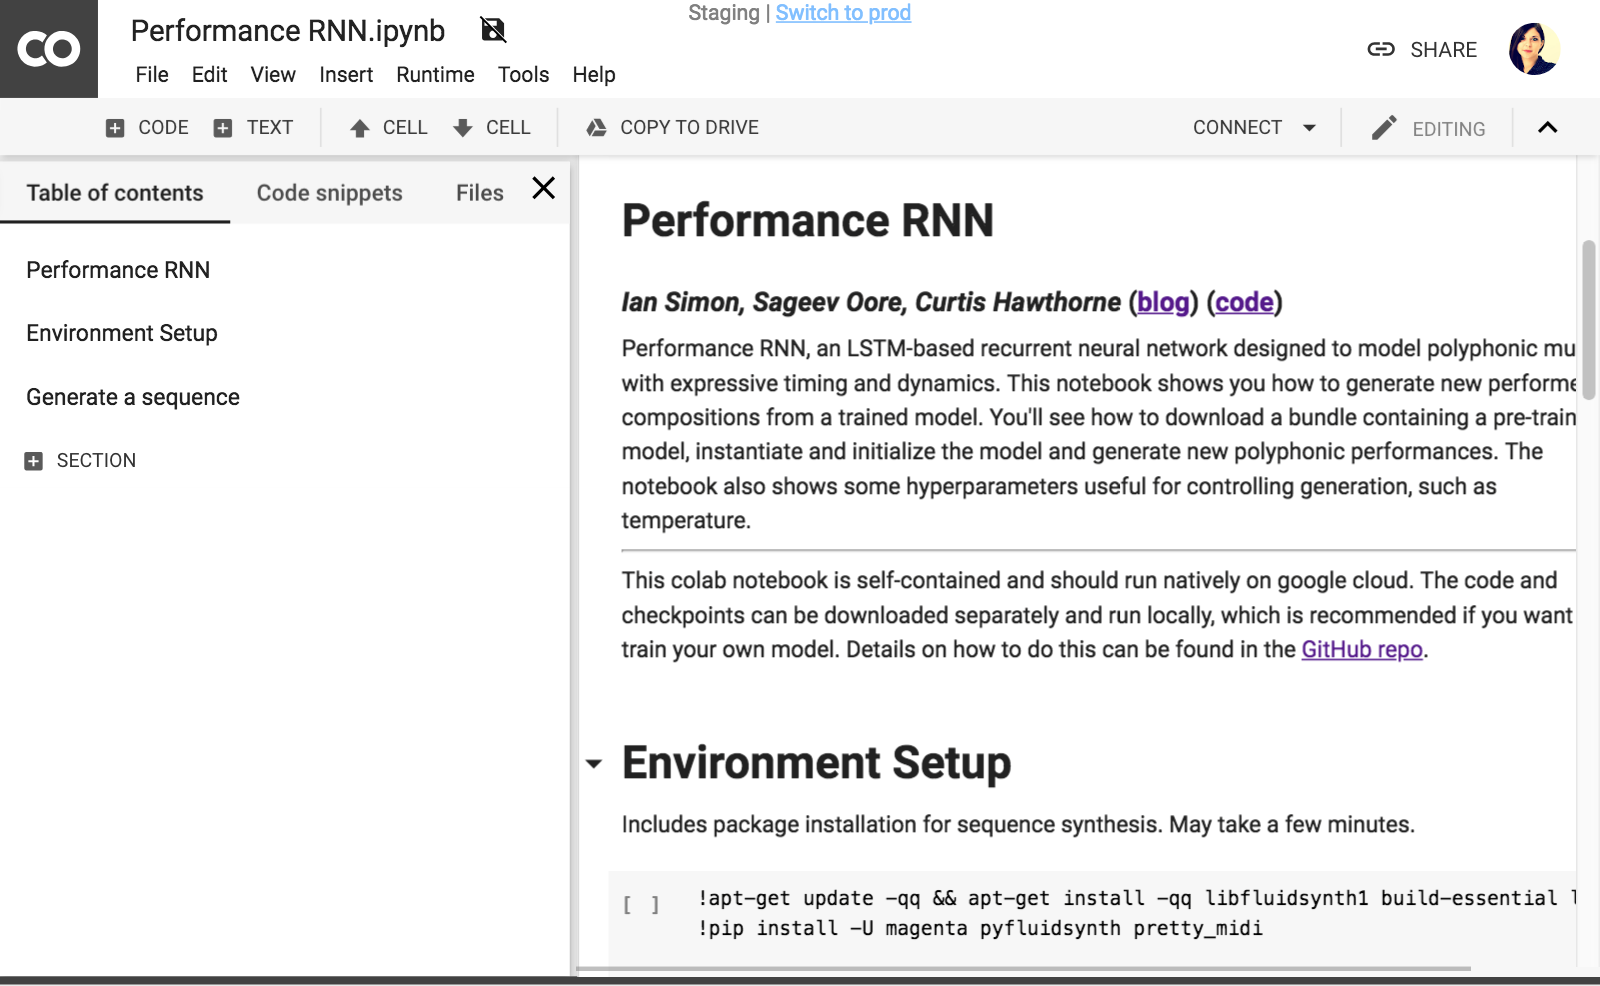 overview of Performance RNN